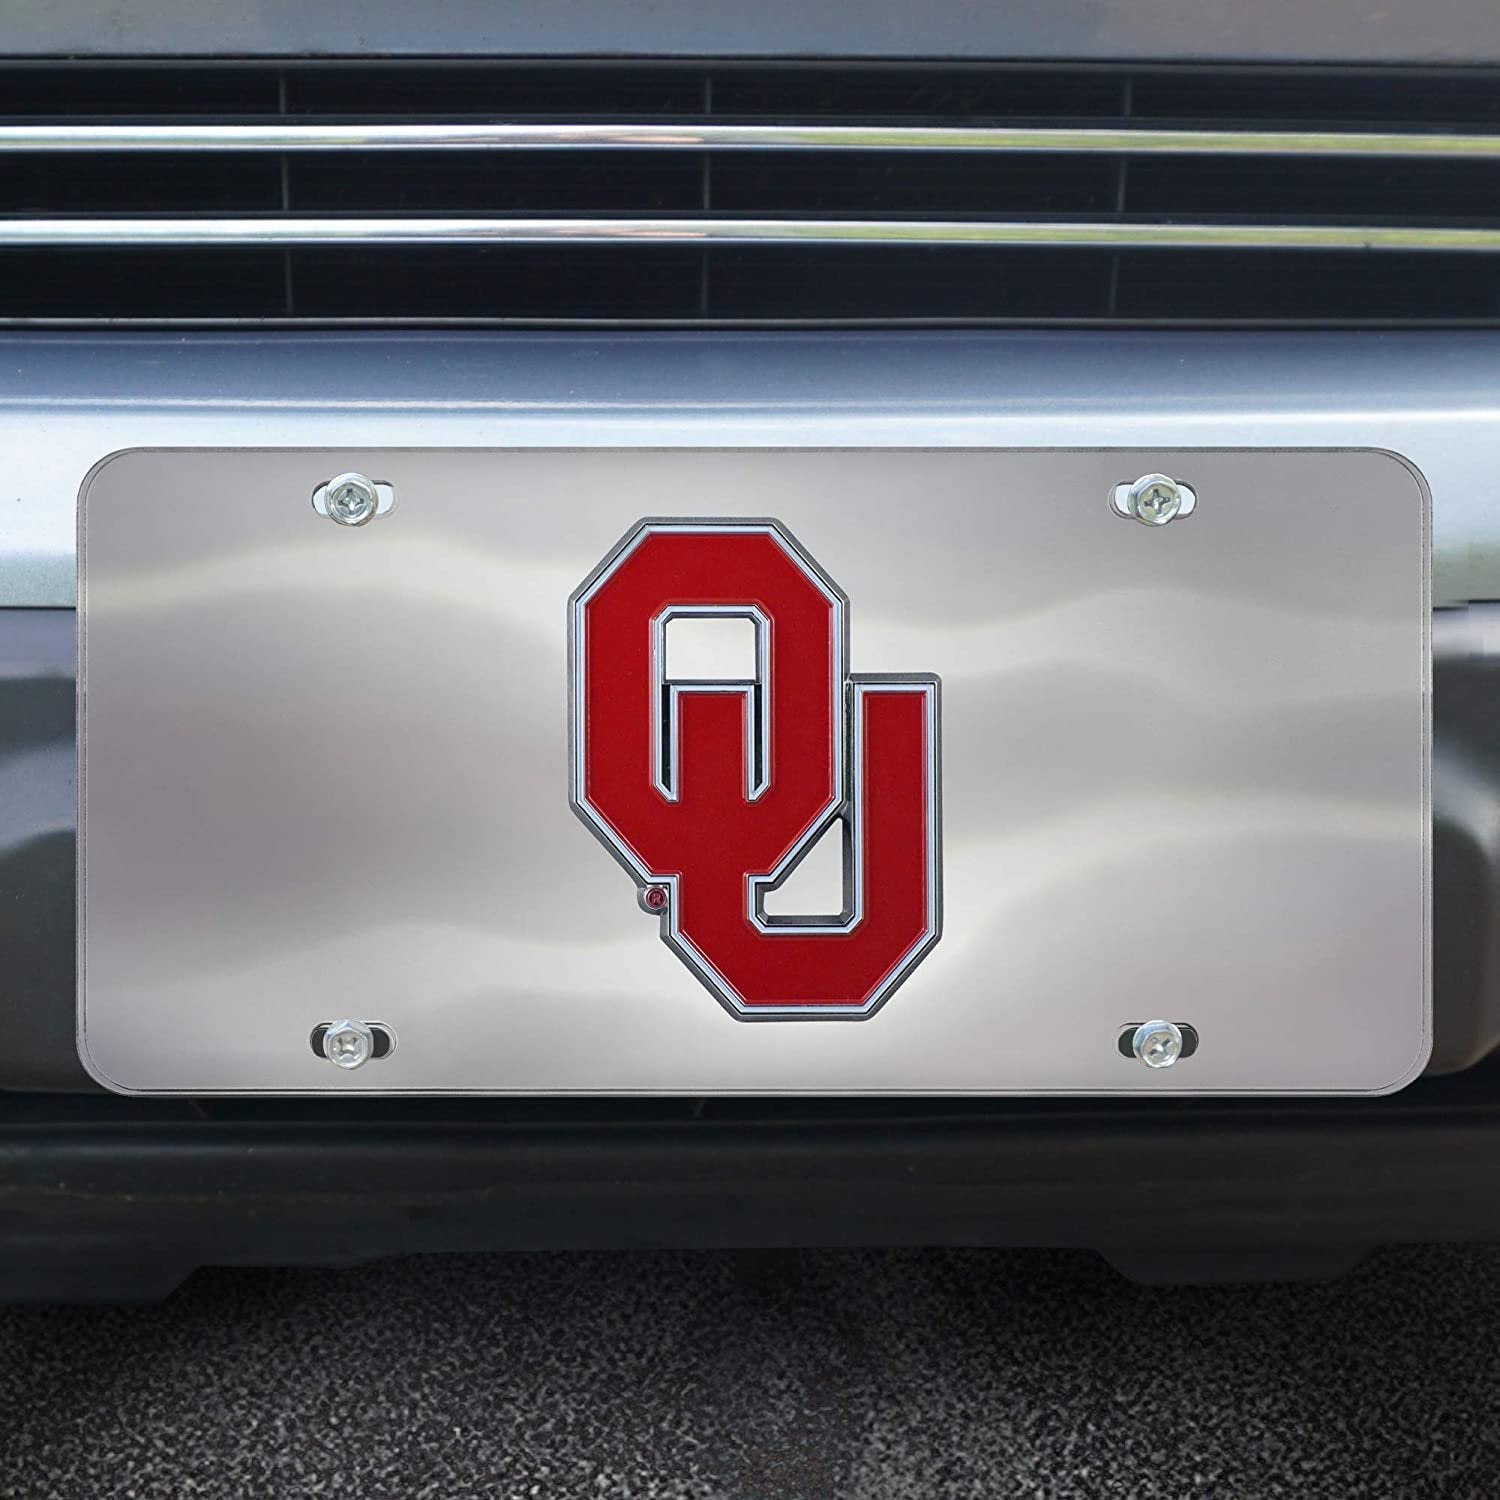 University of Oklahoma Sooners License Plate Tag, Premium Stainless Steel Diecast, Chrome, Raised Solid Metal Color Emblem, 6x12 Inch